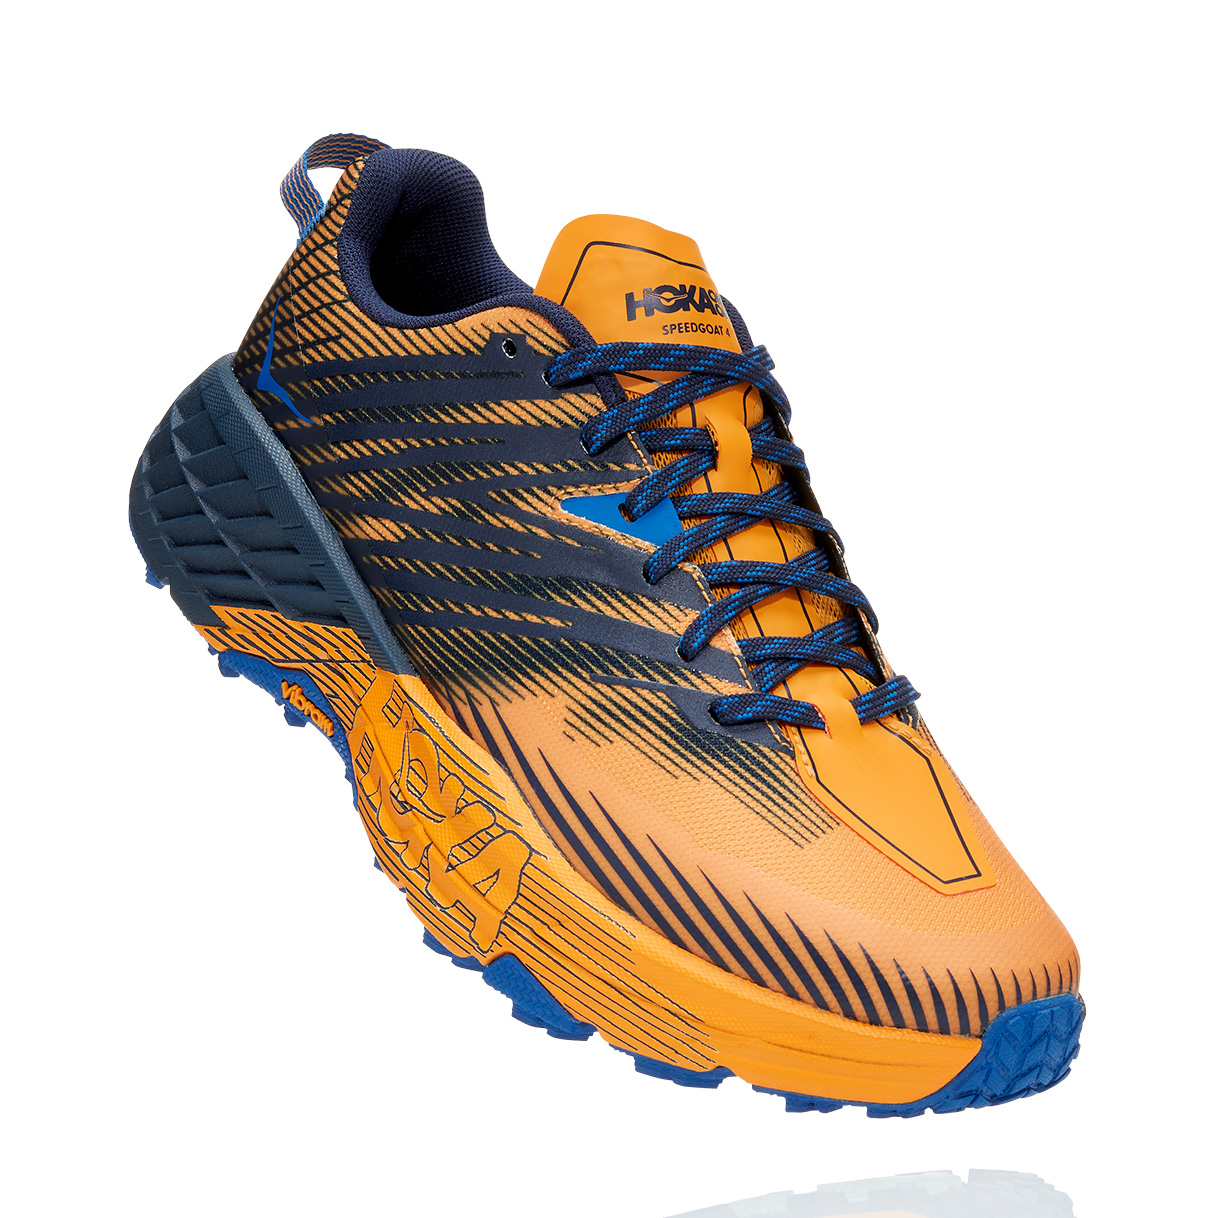 Hoka One One Speedgoat 4 M - Trail Running Shoes - buy online at Sport ...